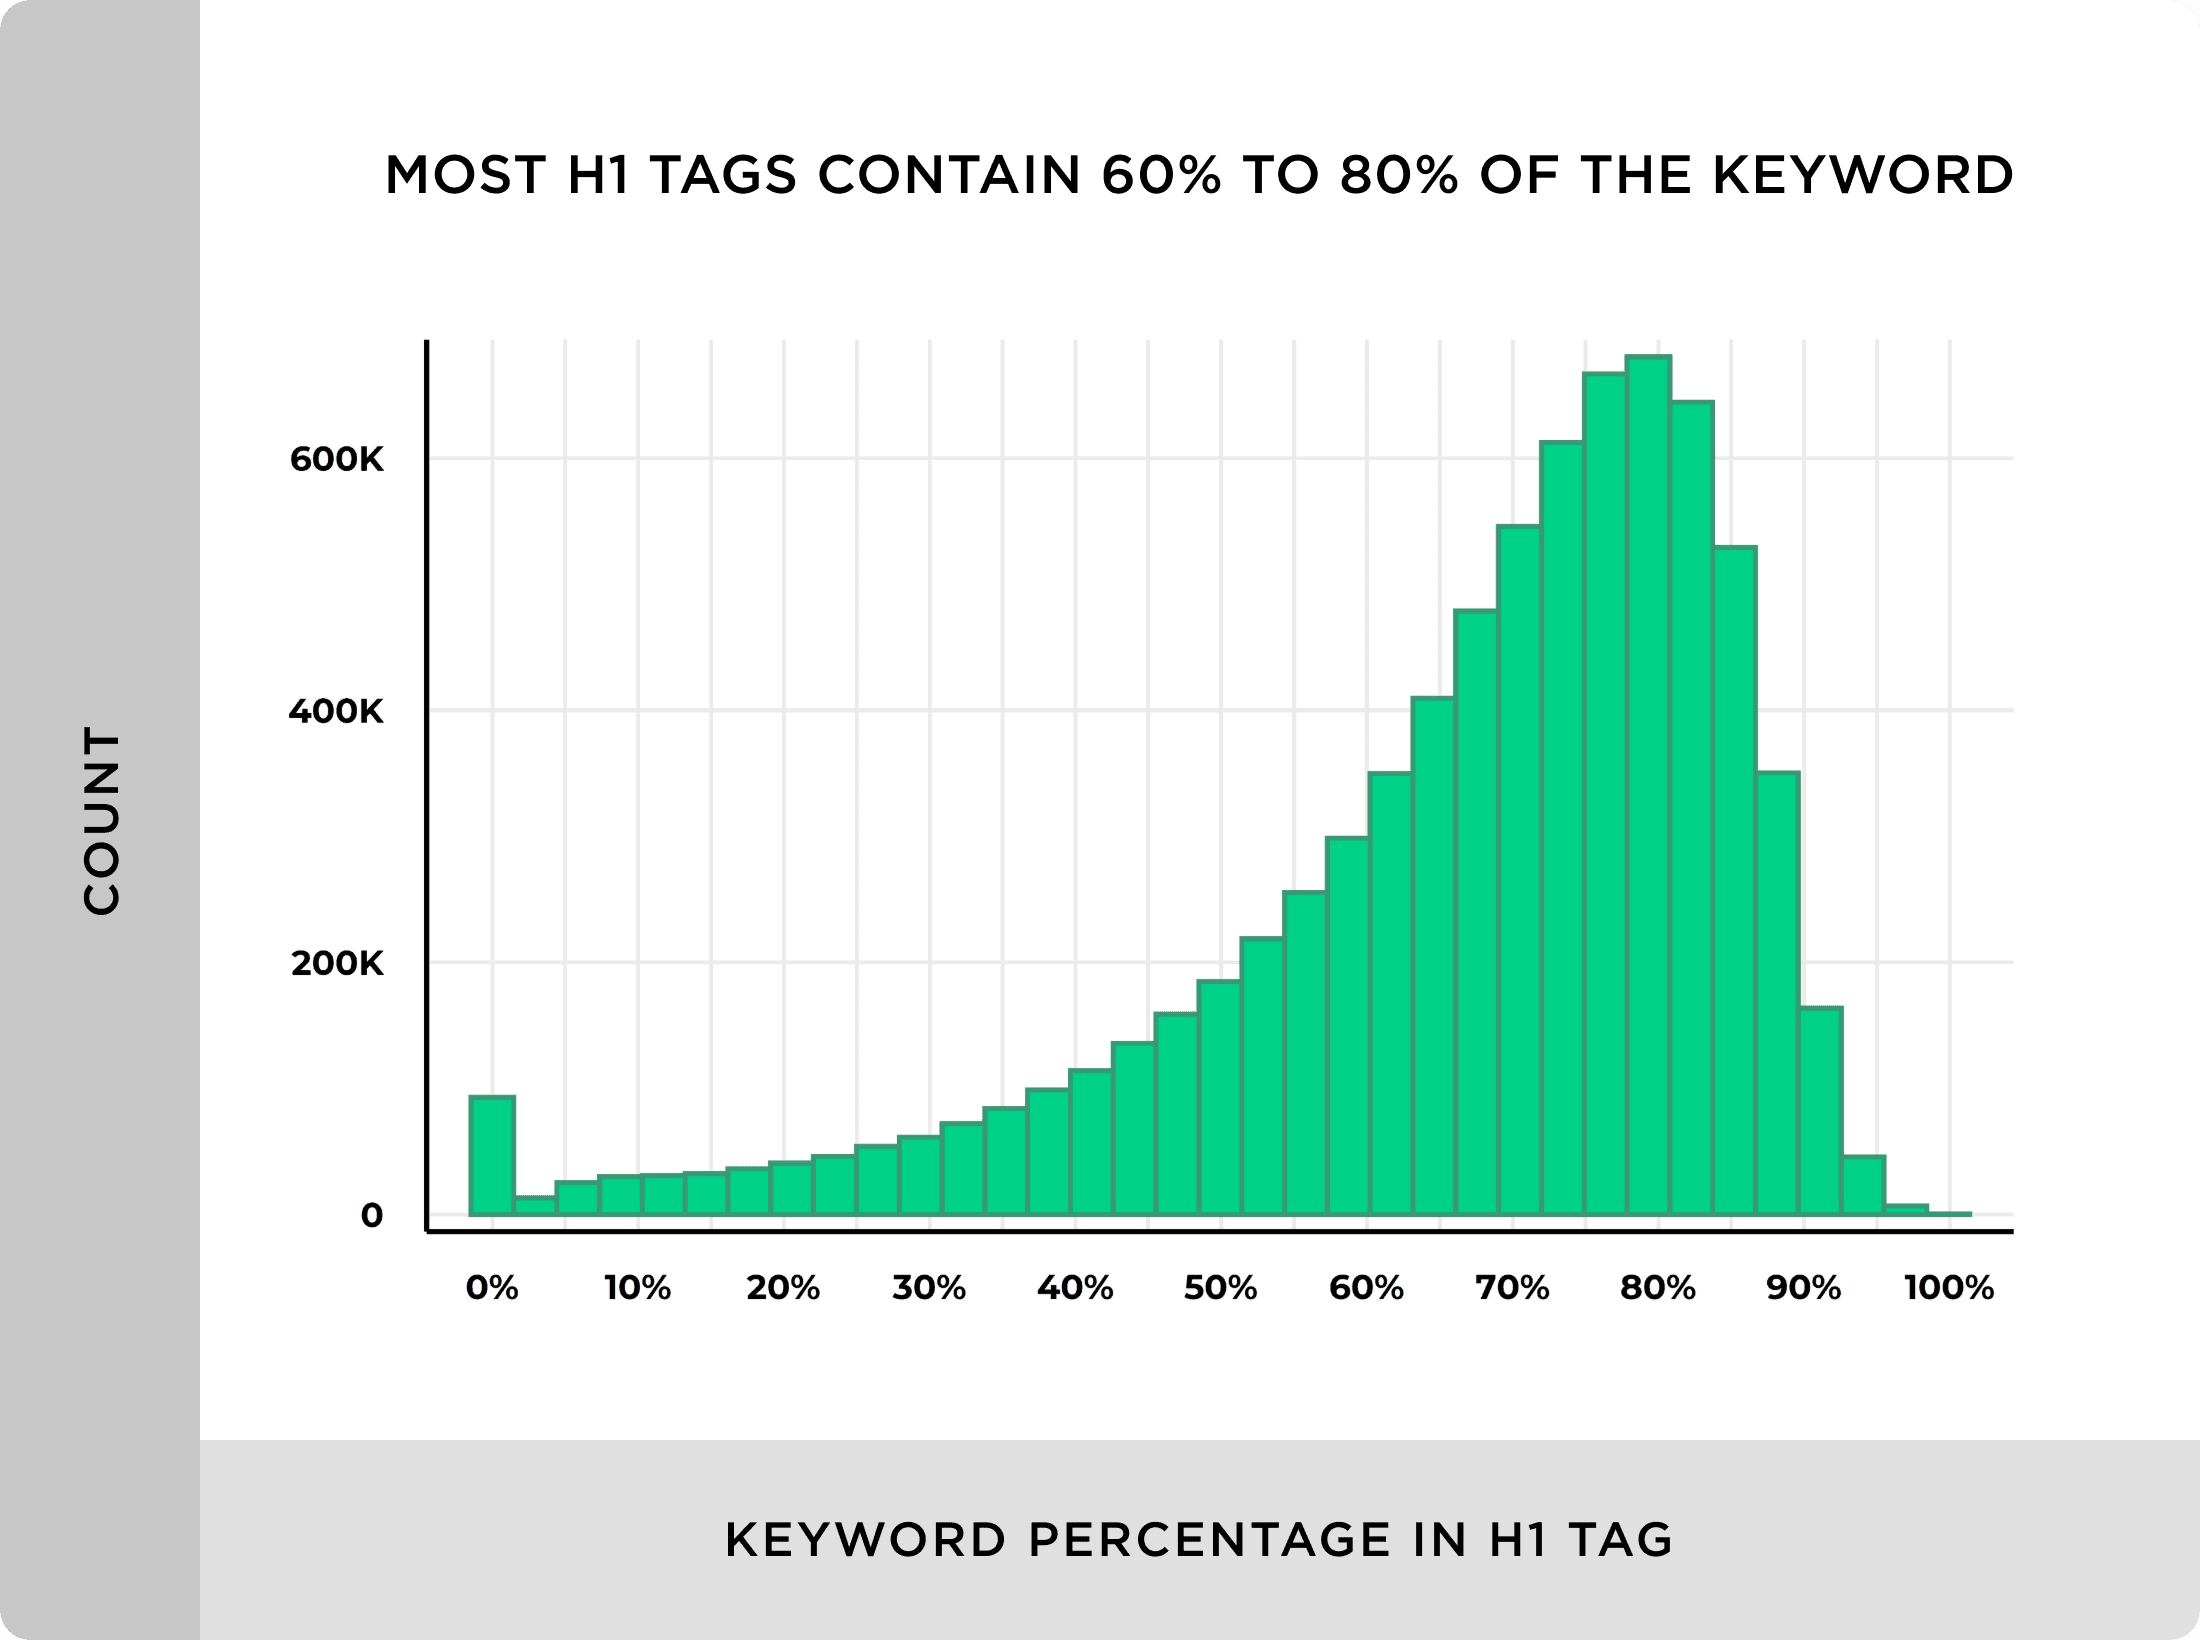 Most H1 tags contain 60 to 80 percent of the keyword